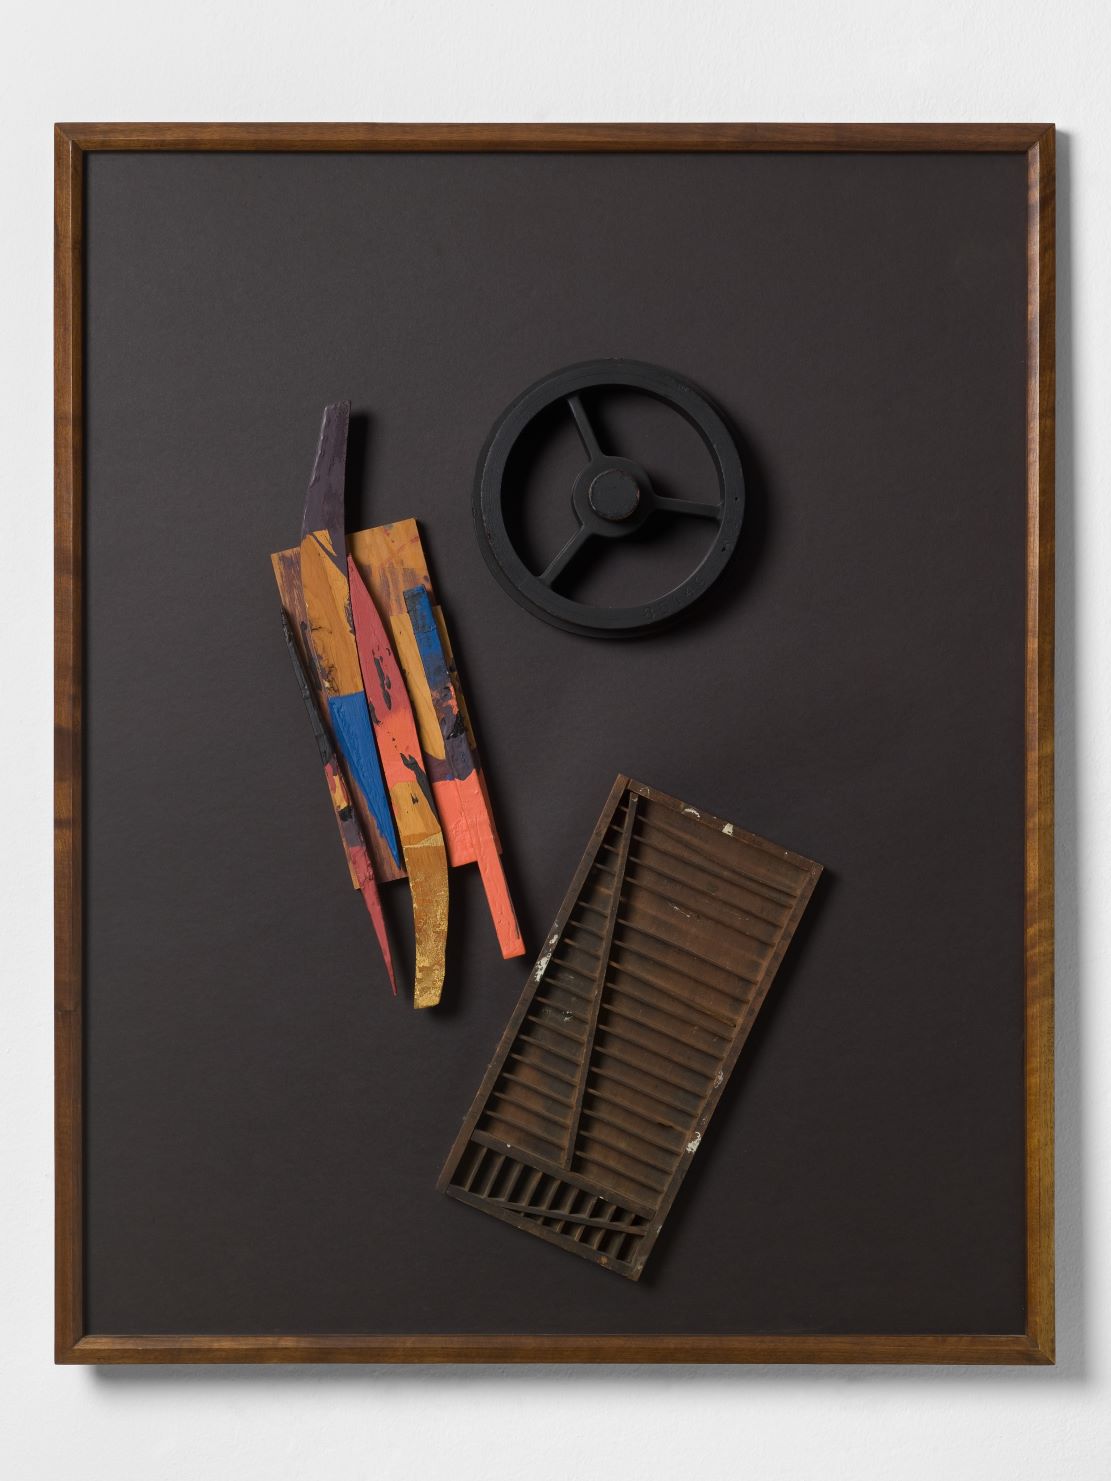 mostra-milano----out-of-order.-the-collages-of-louise-nevelson---immagini-mostra-milano----out-of-order_(2).jpg